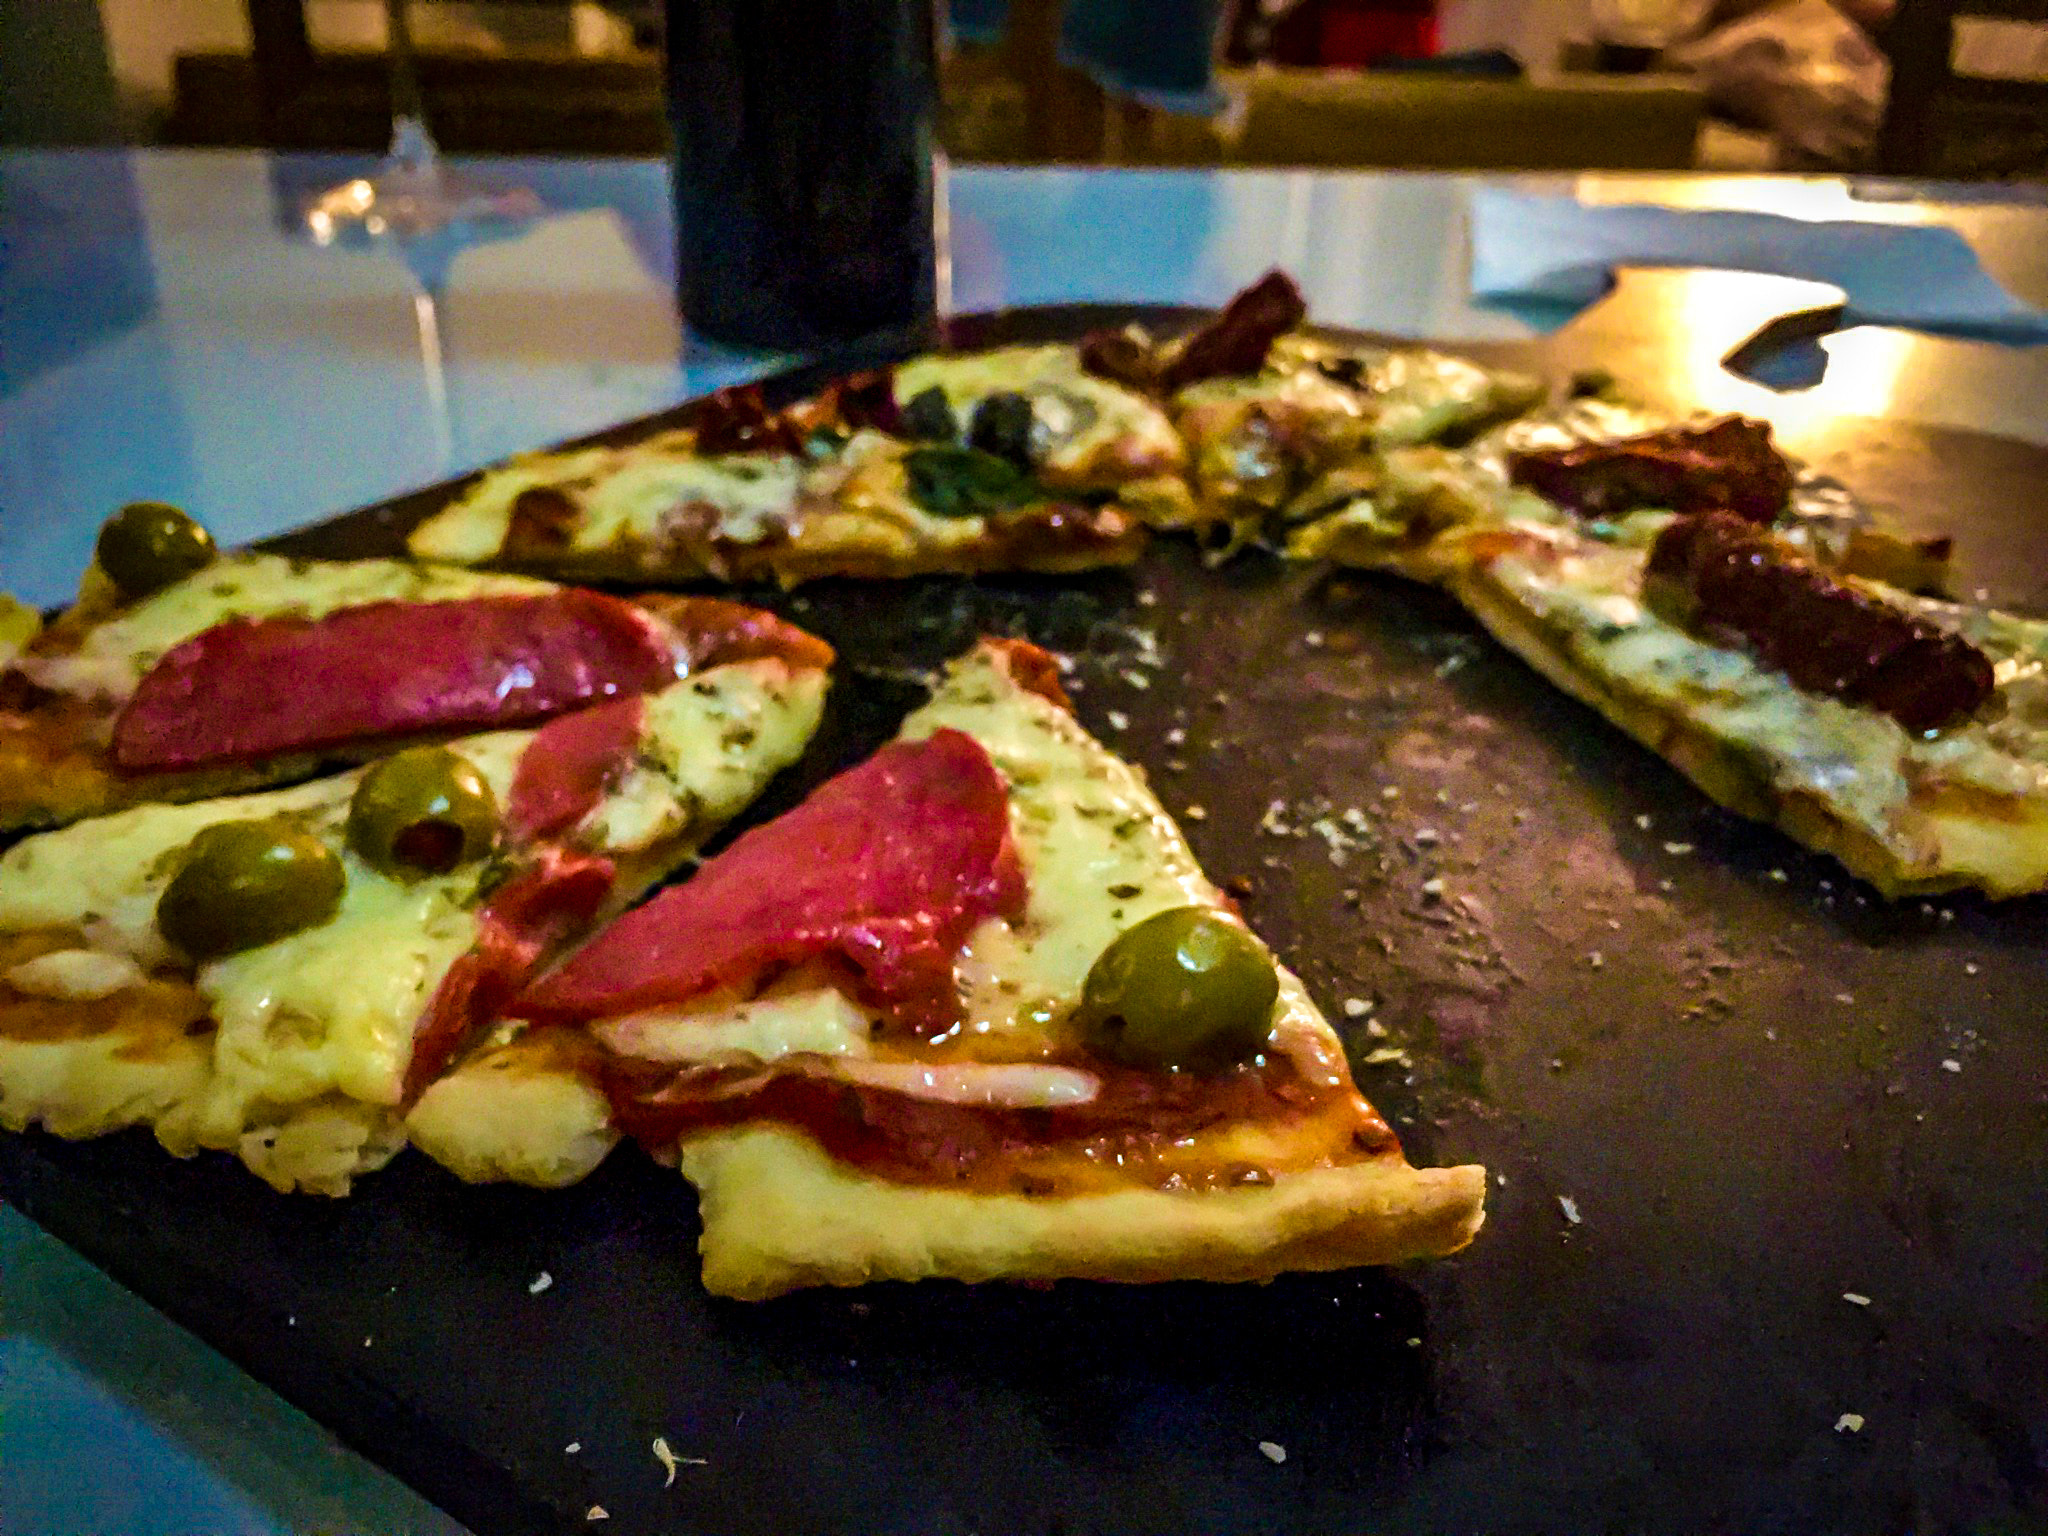 Jag.gr 645 PRO Mk III for Apple iPhone 6 + iPhone 6 back camera 4.15mm f/2.2 sample photo. Slices of pizza photography